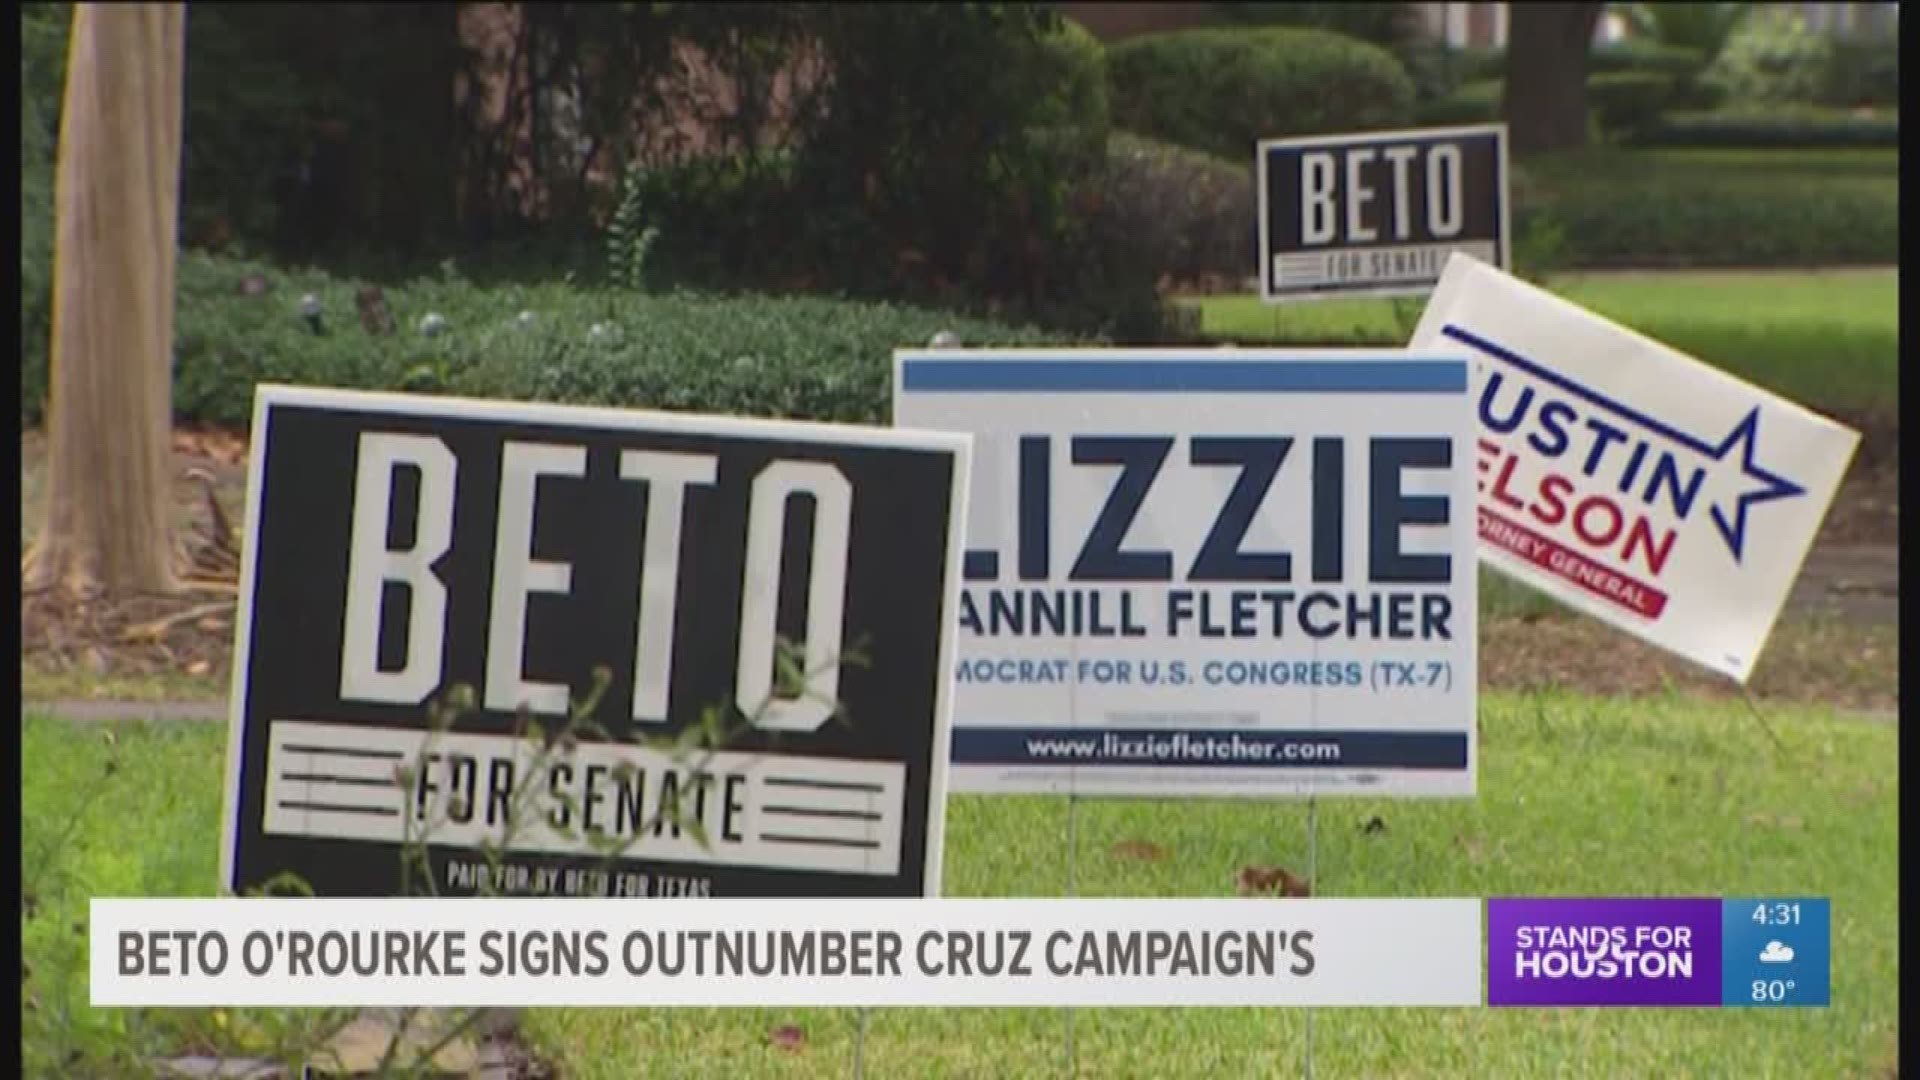 While Beto O'Rourke is taking a non convention approach, neighbors are wondering where Ted Cruz's signs are.